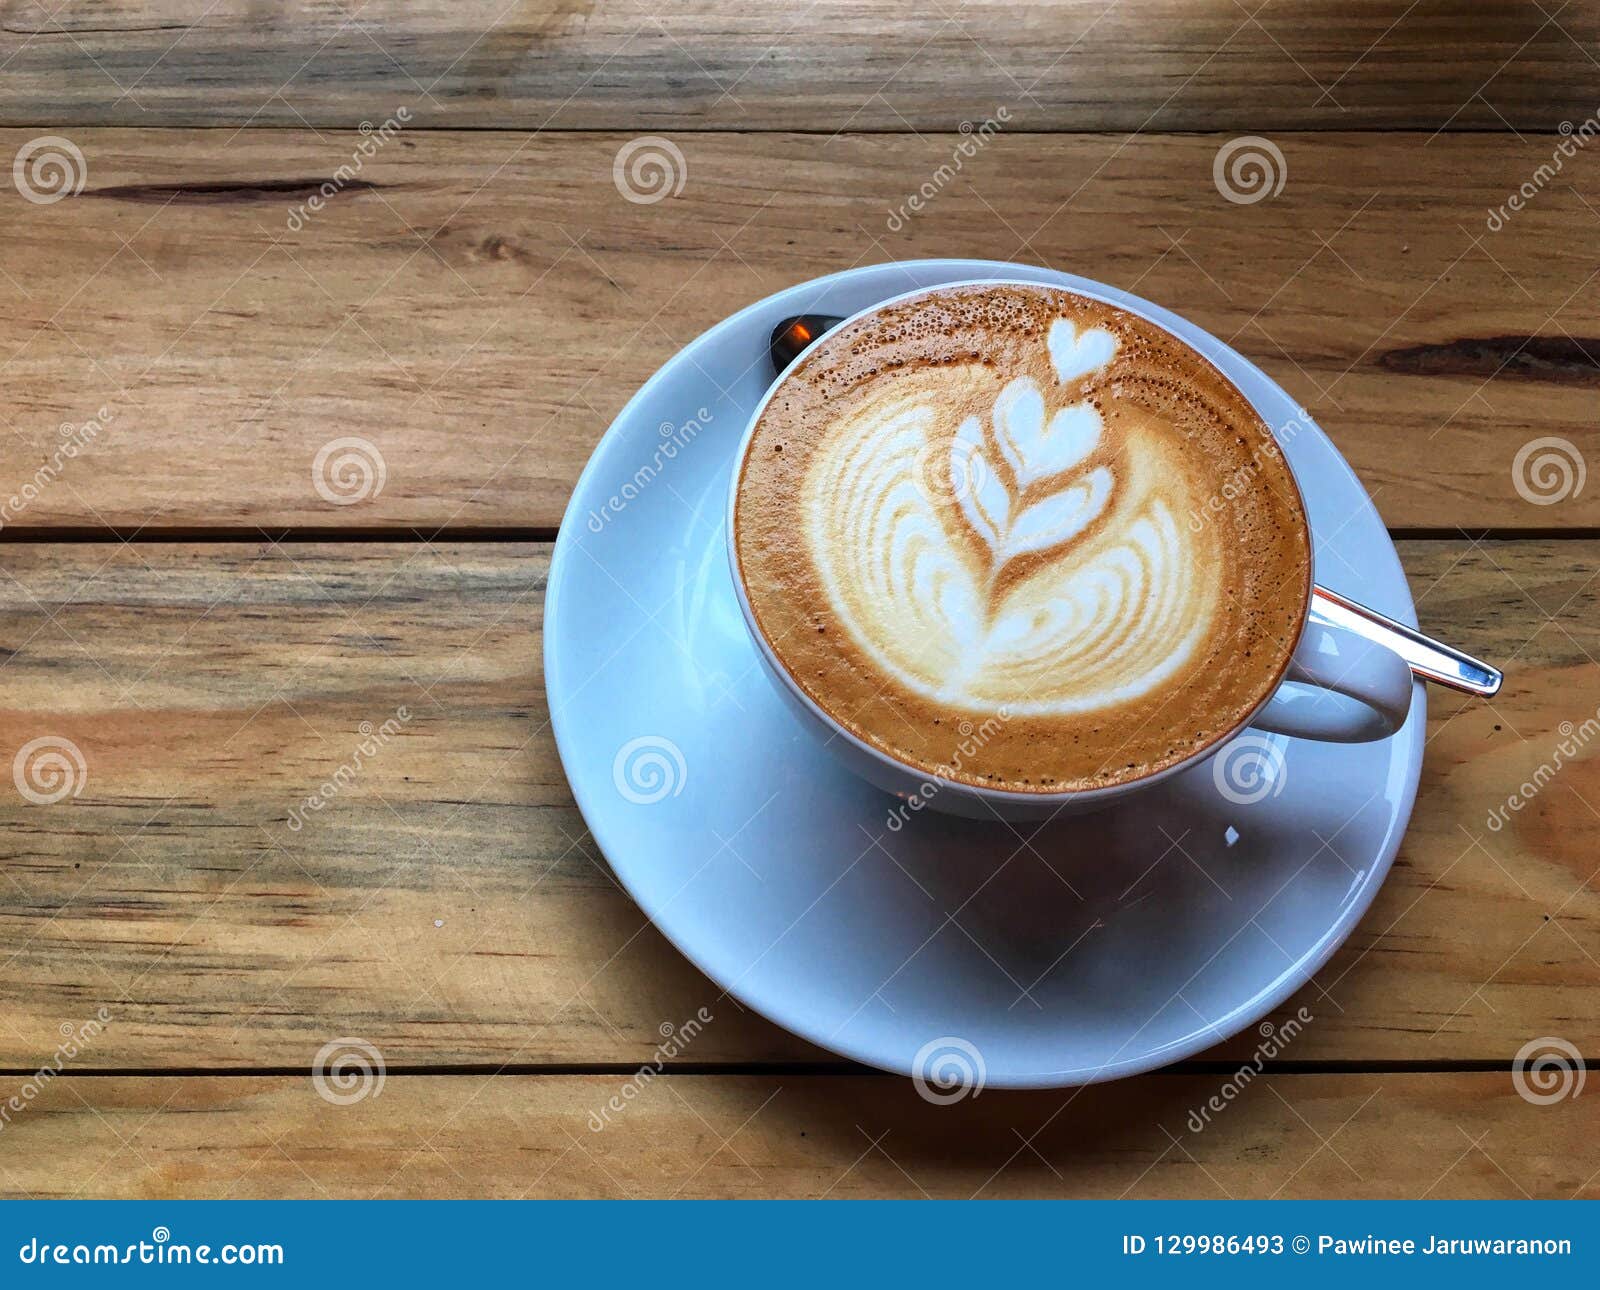 hot cappuccino coffee in white cup and saucer with spoon on wooden table background. art of milk foam drawing.